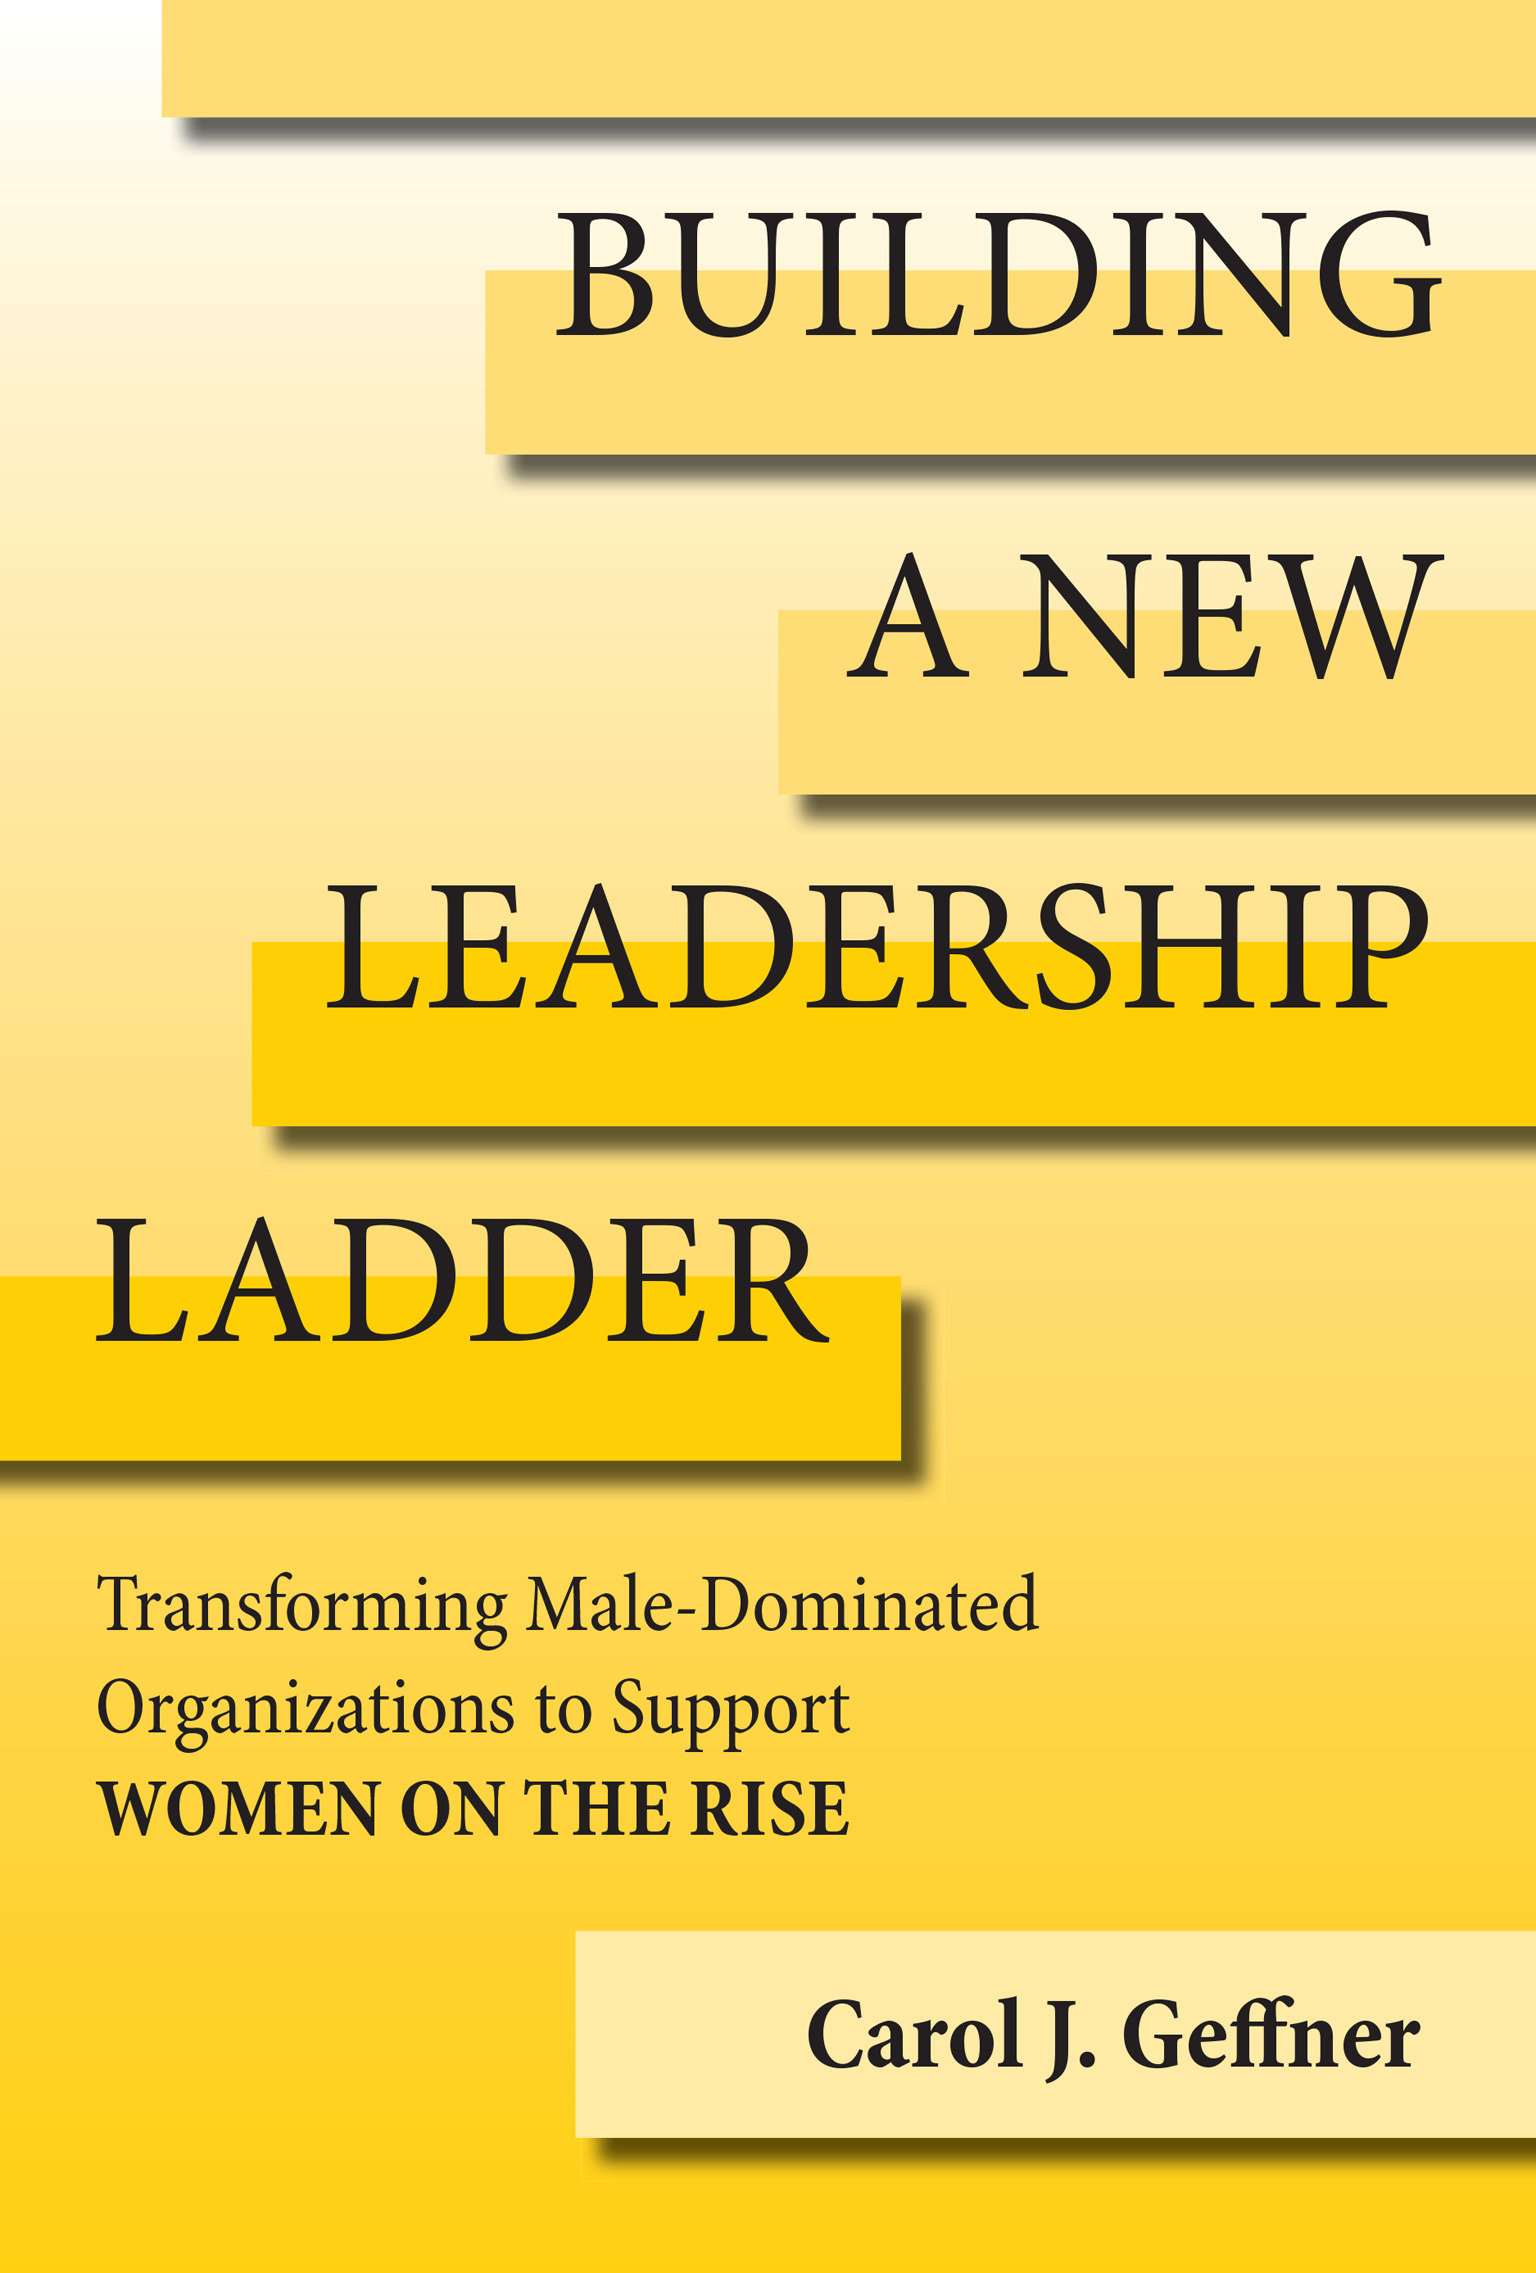 Building A New Leadership Ladder (Hardcover Book)